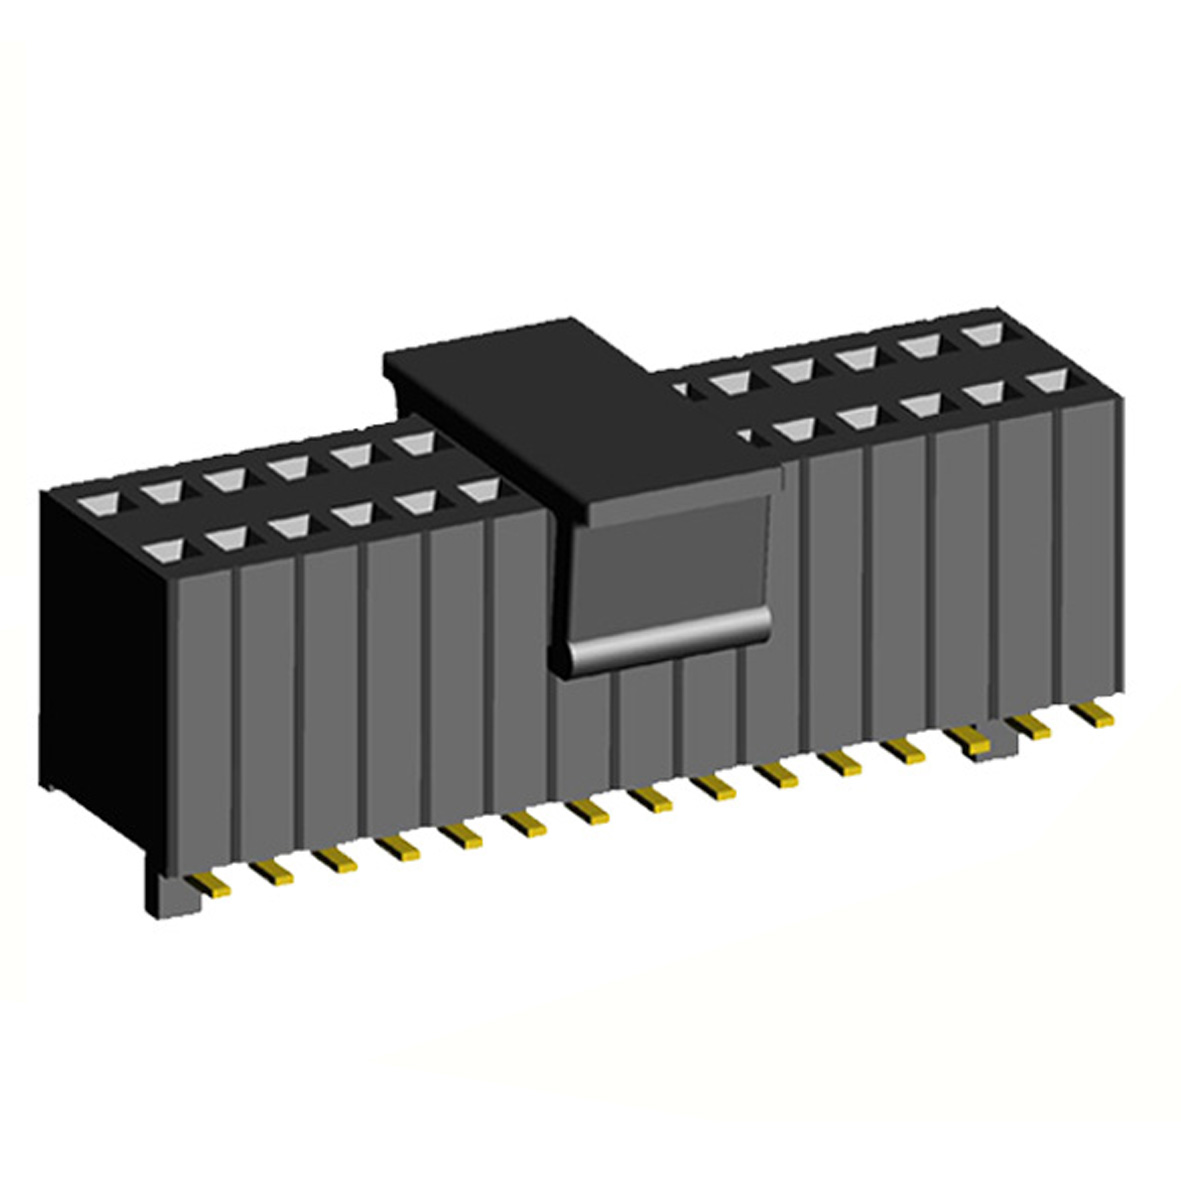 2206SB-XXXG-SM-60-CG series, straight double row sockets on the Board for surface (SMD) mounting on the Board with guides on the Board and mounting cover, pitch 1,27x2,54 mm, Board-to-Board connectors, pin headers and sockets > pitch 1,27x2,54 mm